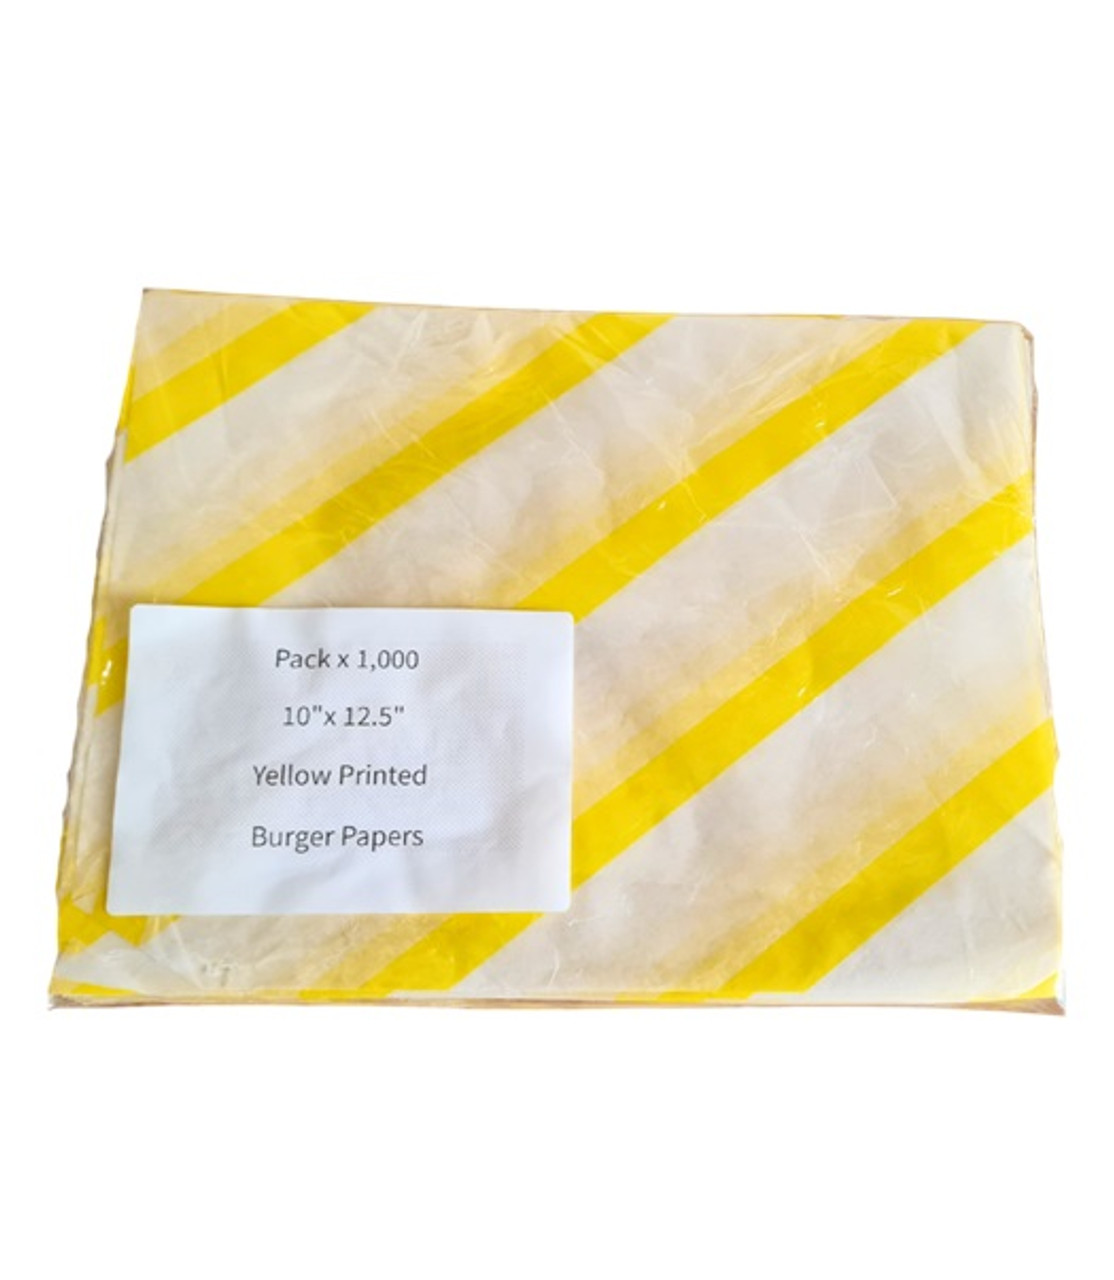 Pack x 1,000 10"x 12.5" Yellow Printed Burger Papers CLEARANCE